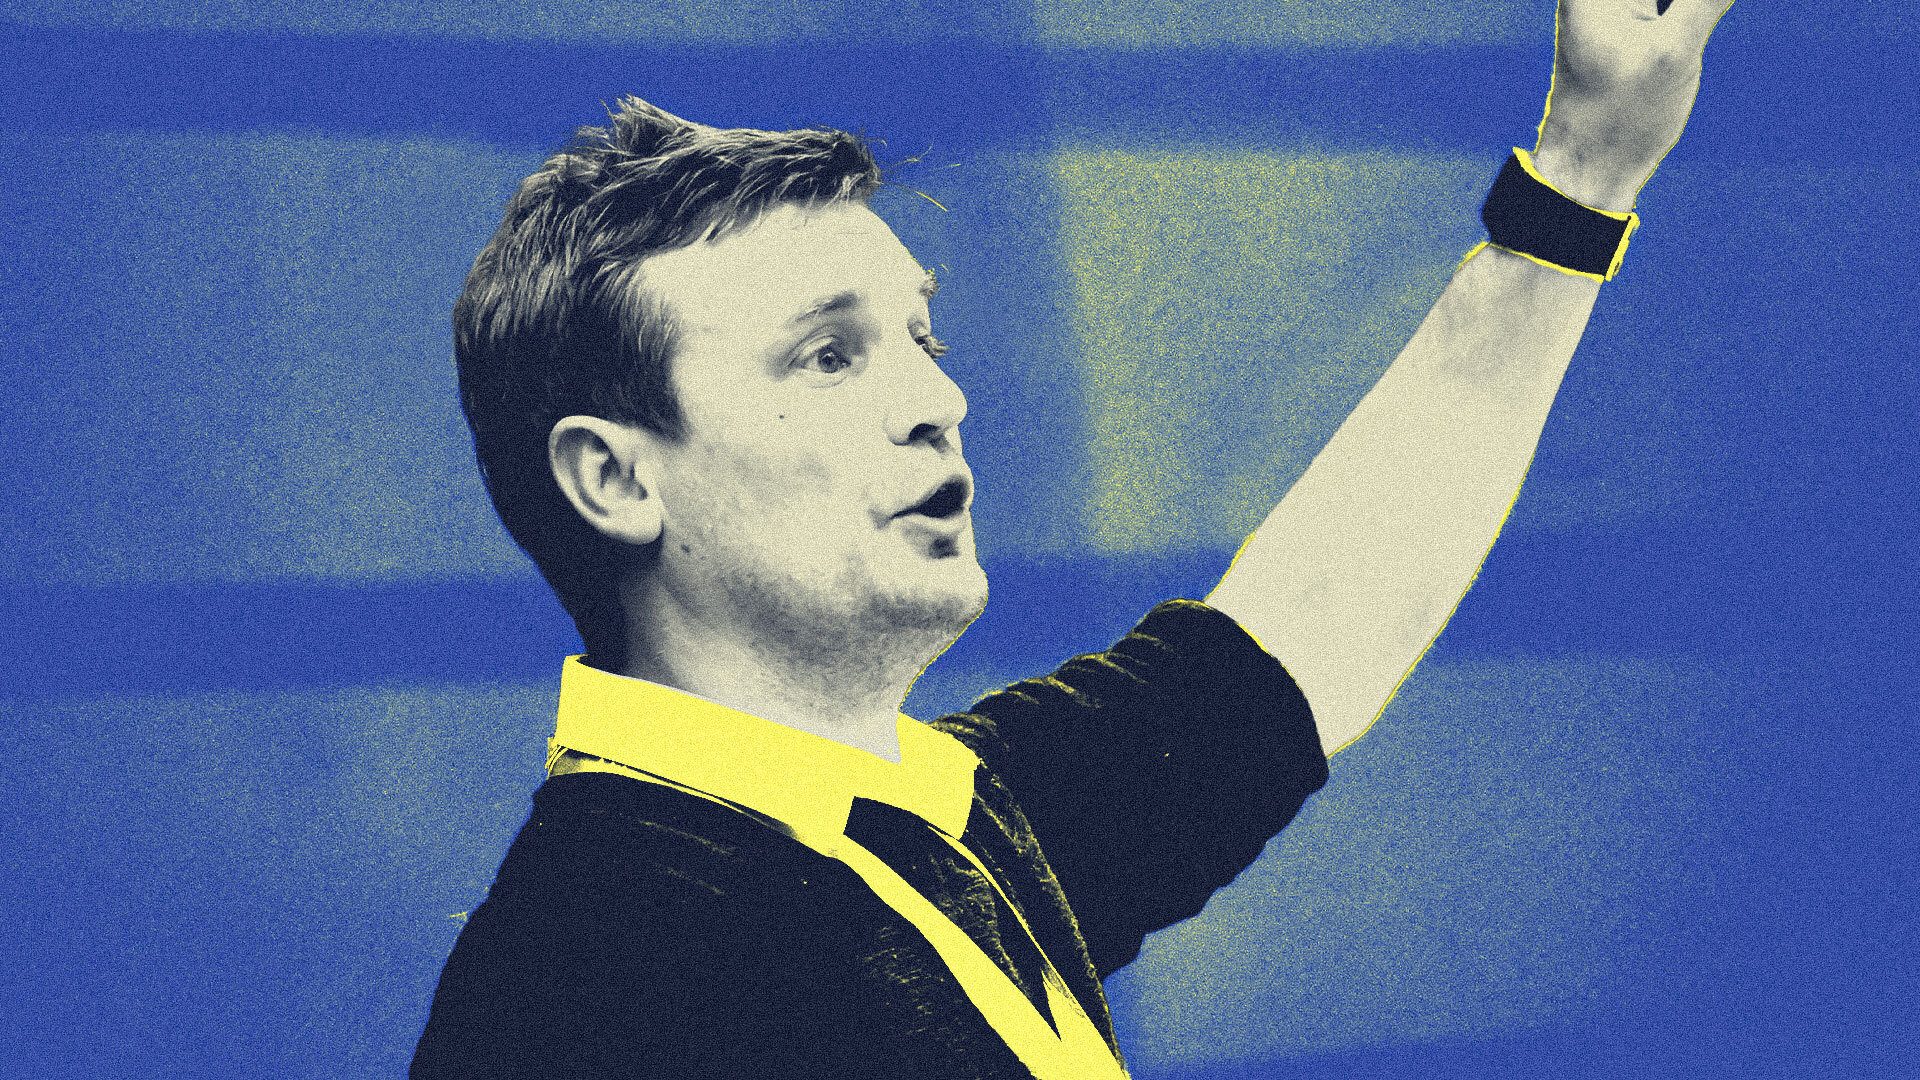 Michael Skubala pictured with one hand in the air, doing some coaching for England Futsal. The picture has been colourised with yellow and blue because those are Leeds colours innit, and it was a bit of a boring photo without that and there aren't many of him out there to choose from